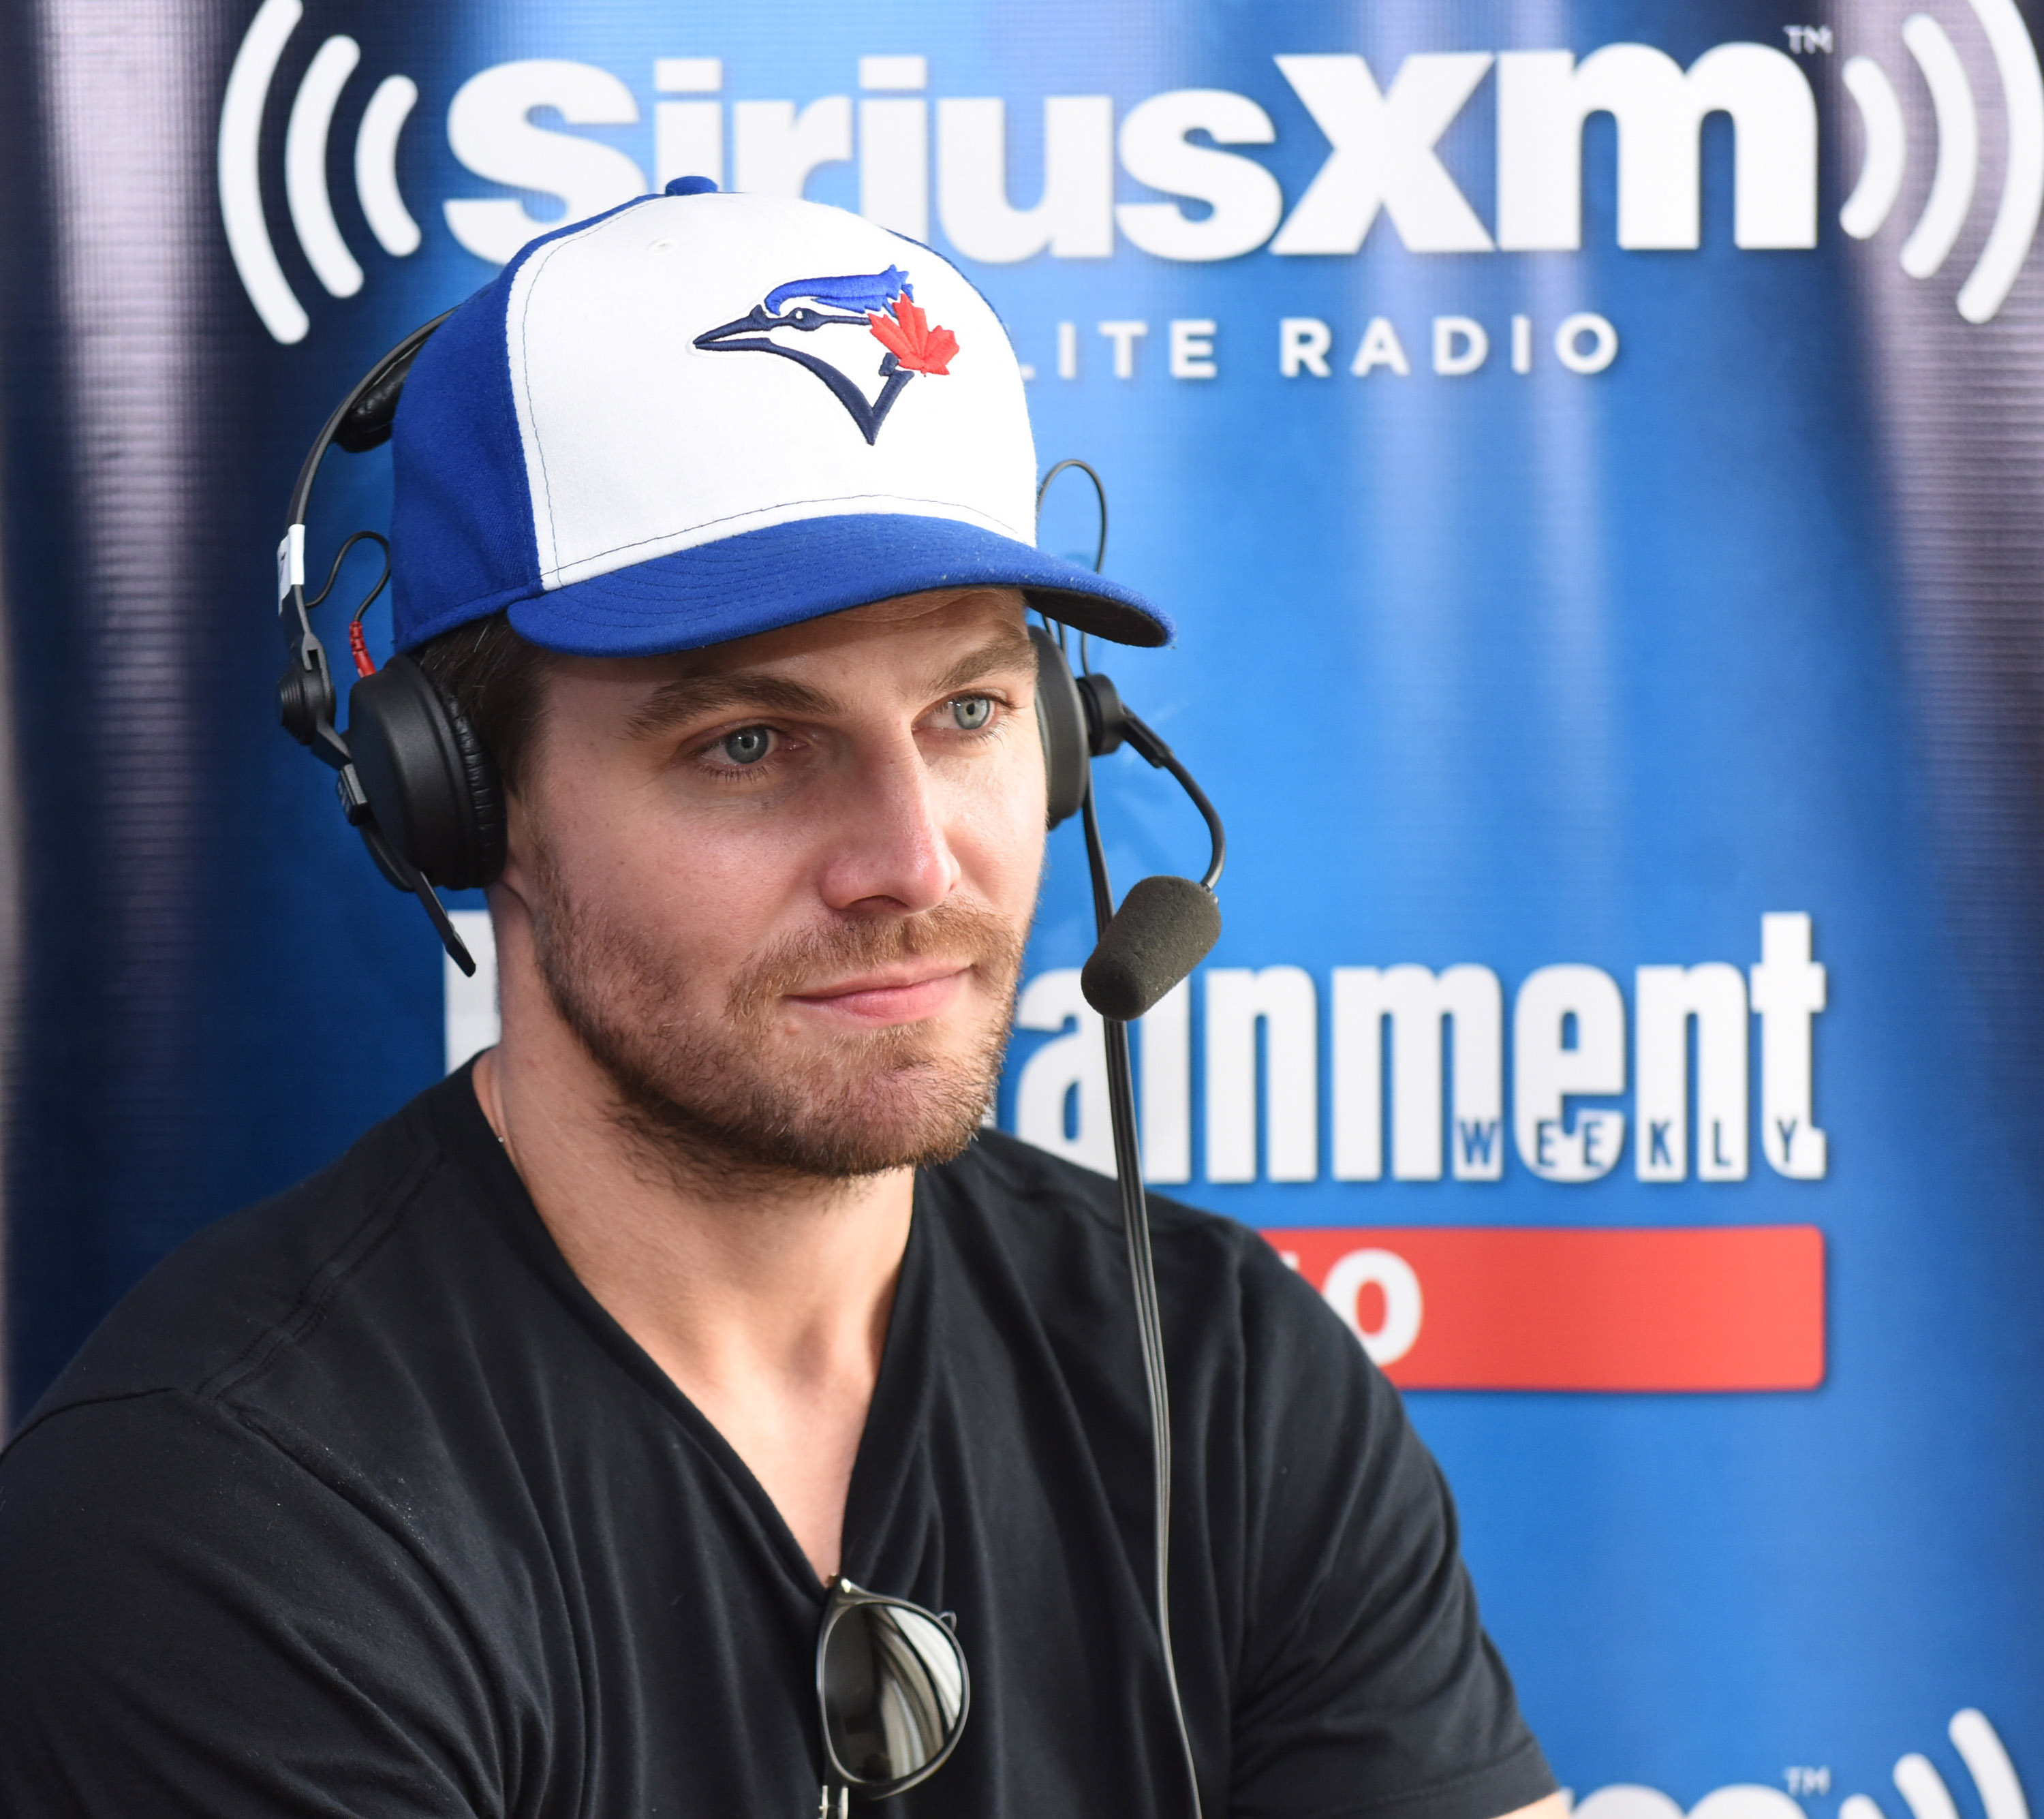 SAN DIEGO, CA - JULY 23: Actor Stephen Amell attends SiriusXM's Entertainment Weekly Radio Channel Broadcasts From Comic-Con 2016 at Hard Rock Hotel San Diego on July 22, 2016 in San Diego, California. (Photo by Vivien Killilea/Getty Images for SiriusXM)